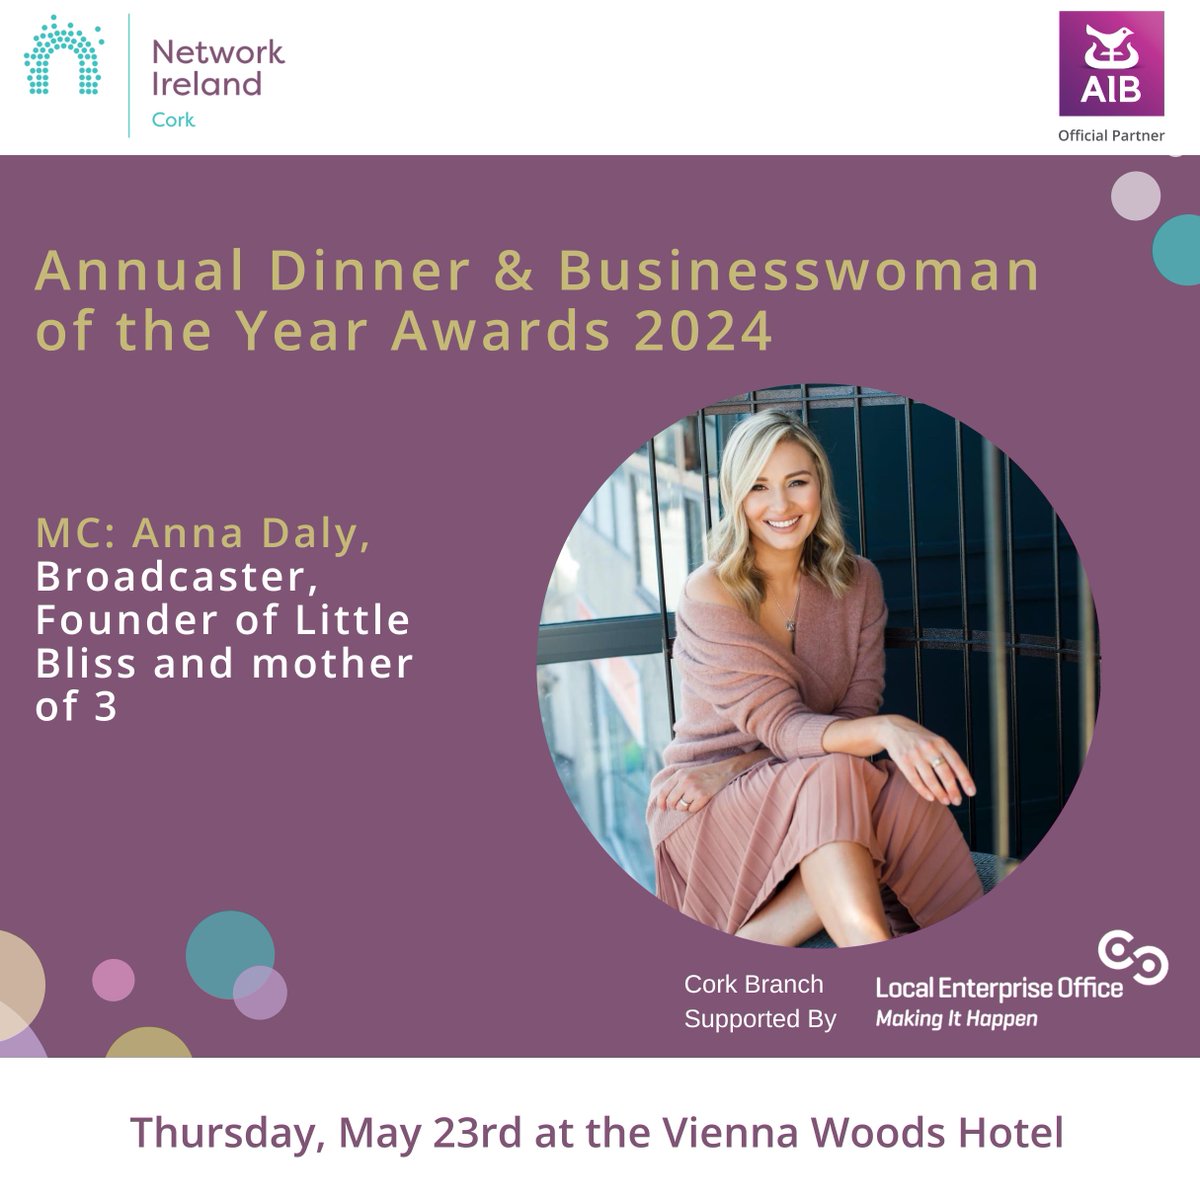 🌟Anna Daly will host the 2024 Businesswoman of the Year Awards! 🏆 🎟️ Secure your tickets for an inspiring evening! Event details and tickets here: bit.ly/44hfBkv #NetworkIreland #NetworkCork #SupportedByAIB #AStepAhead #AnnaDaly